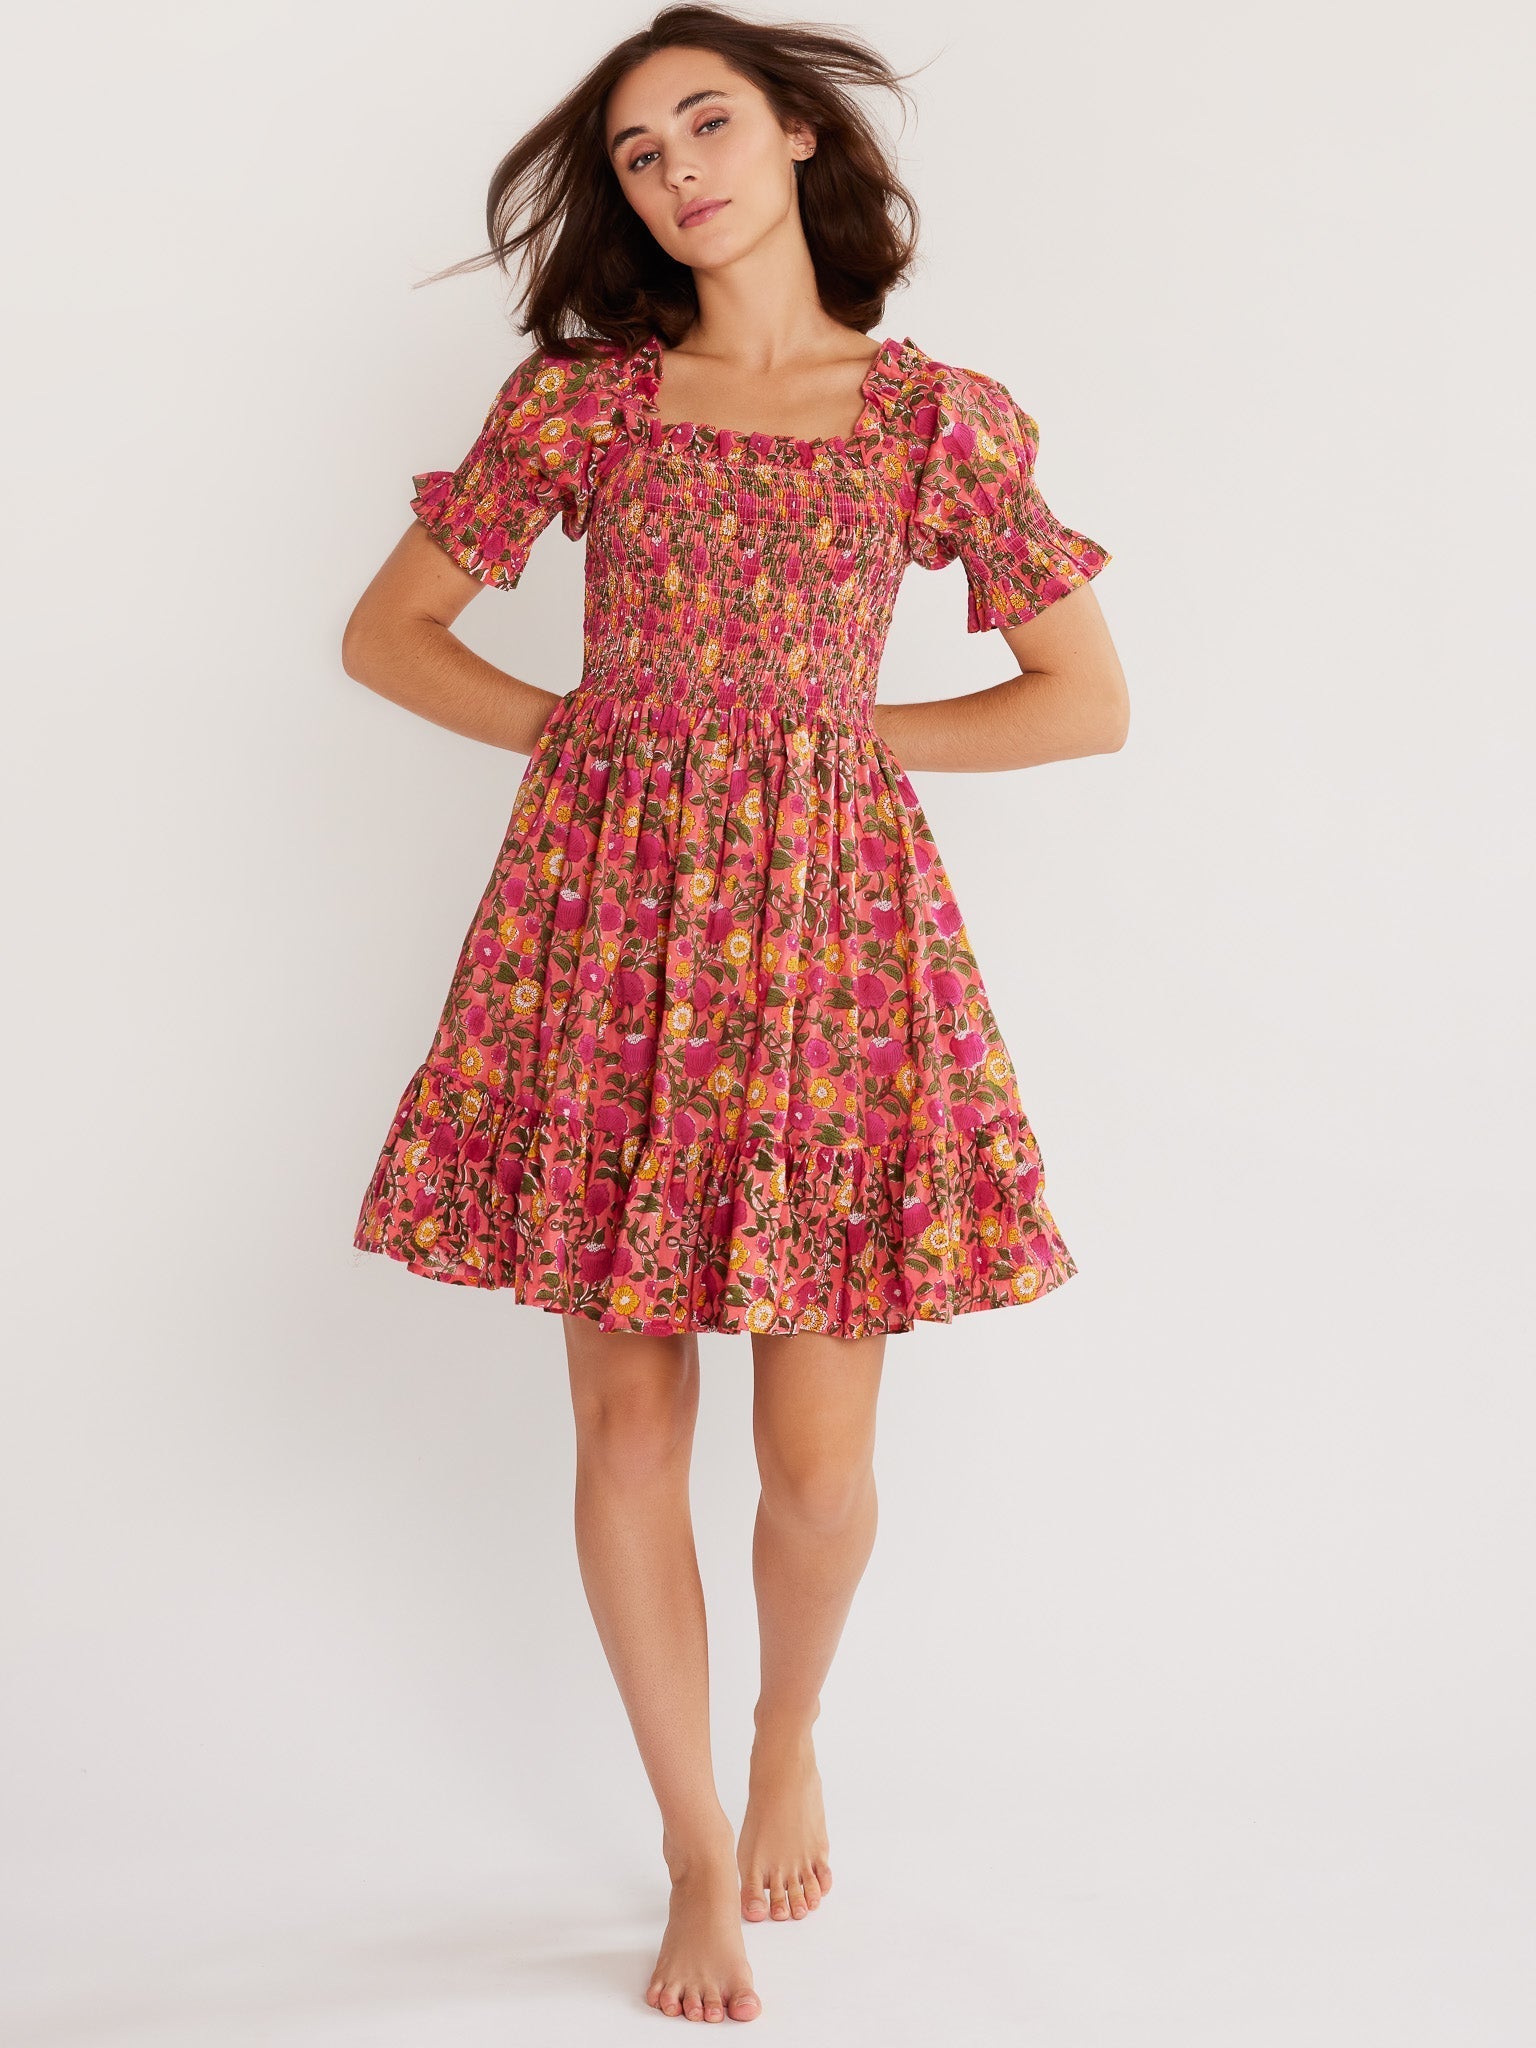 MILLE Clothing Kiki Dress in Passionfruit